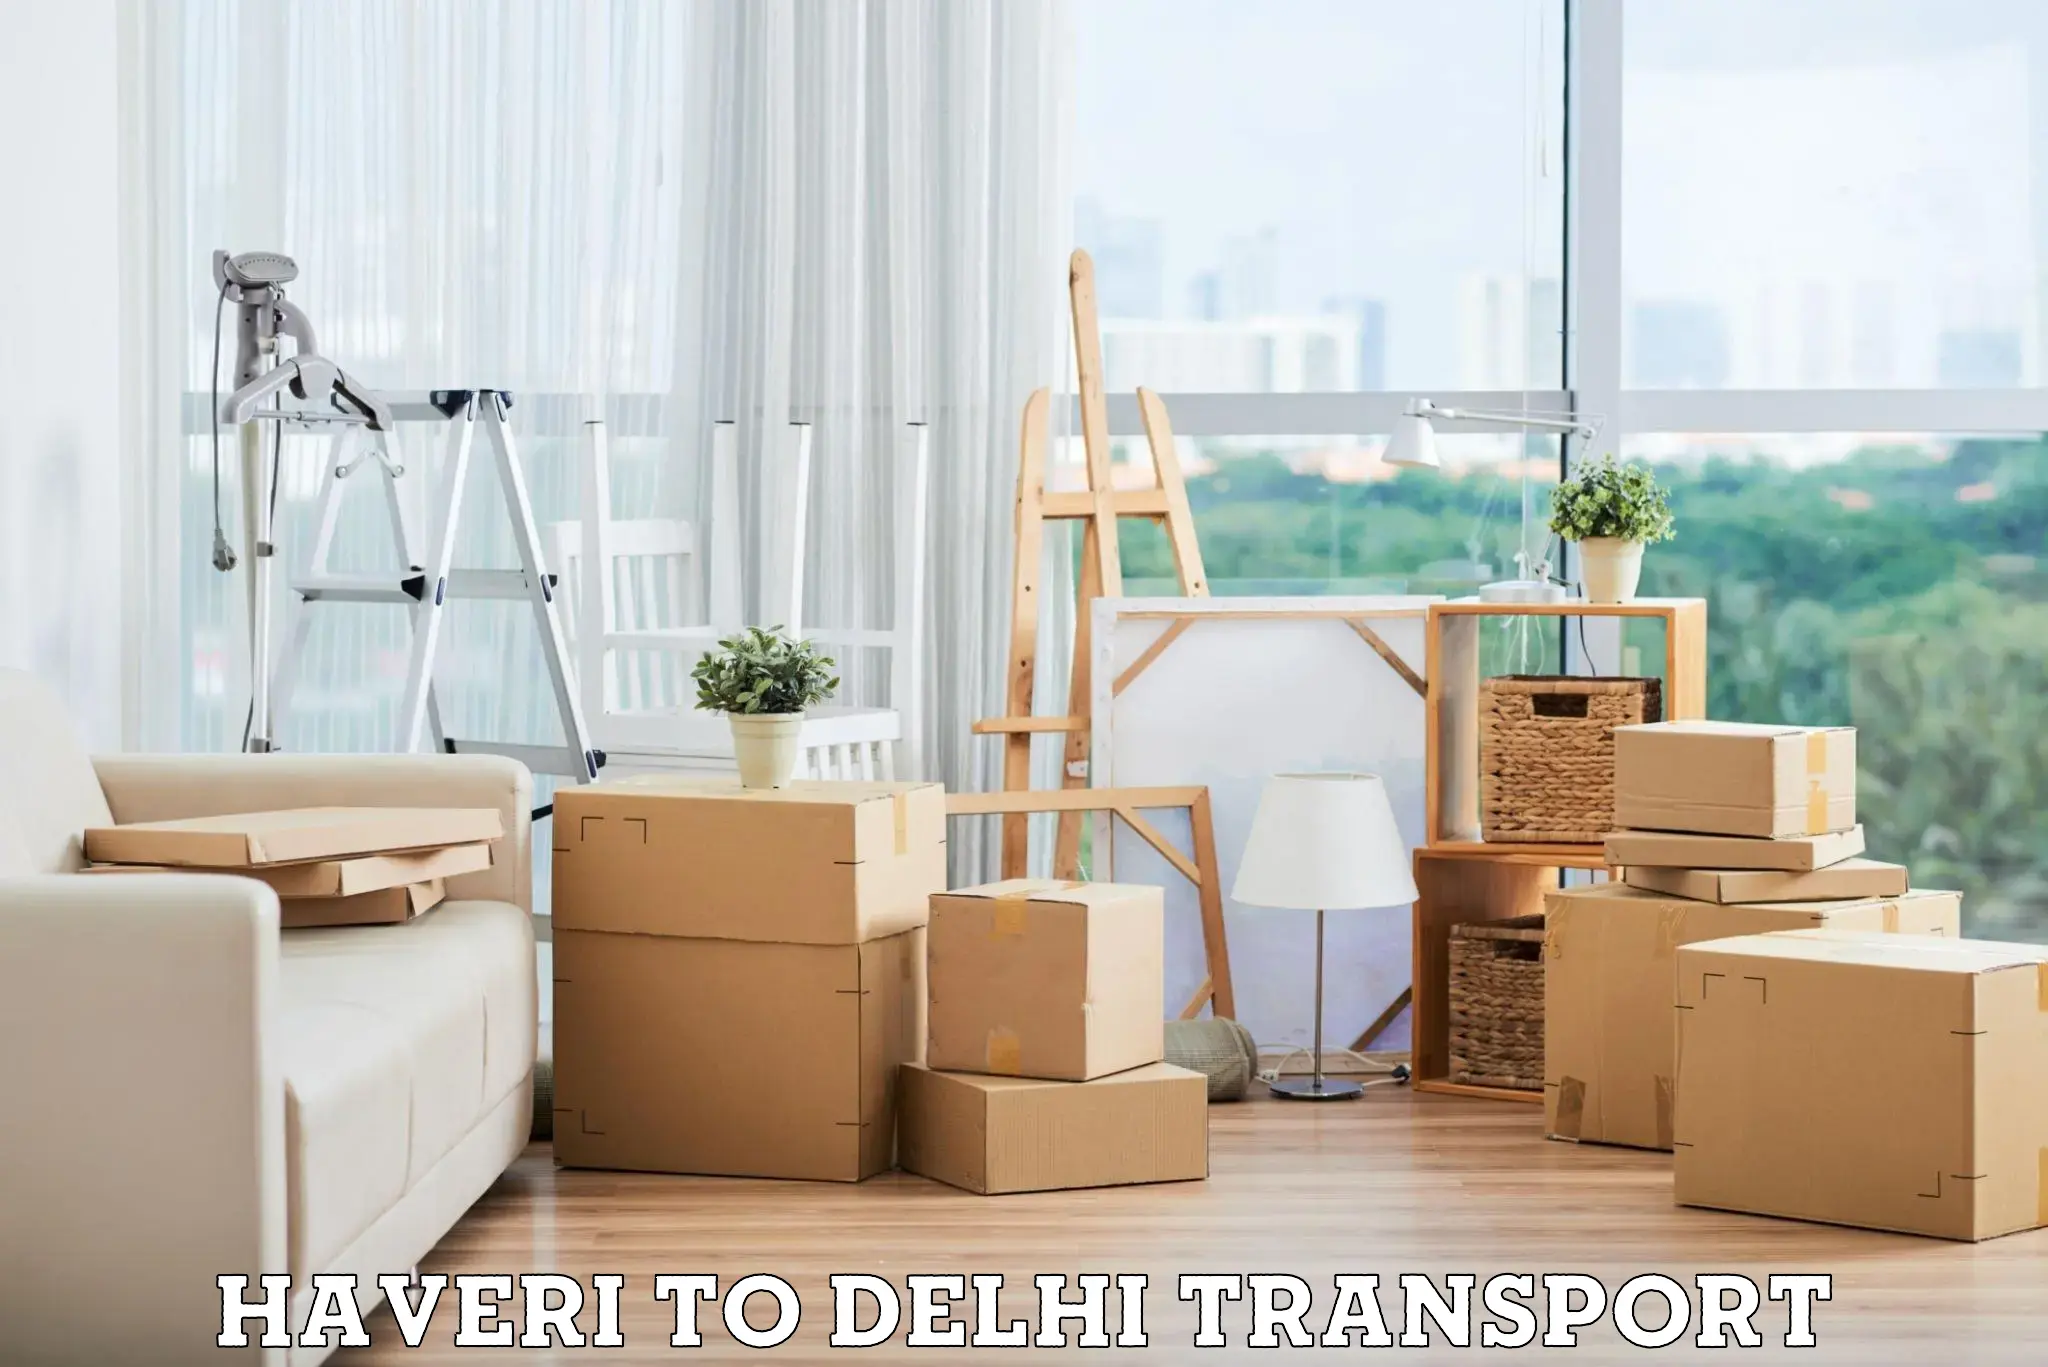 Air cargo transport services Haveri to NCR